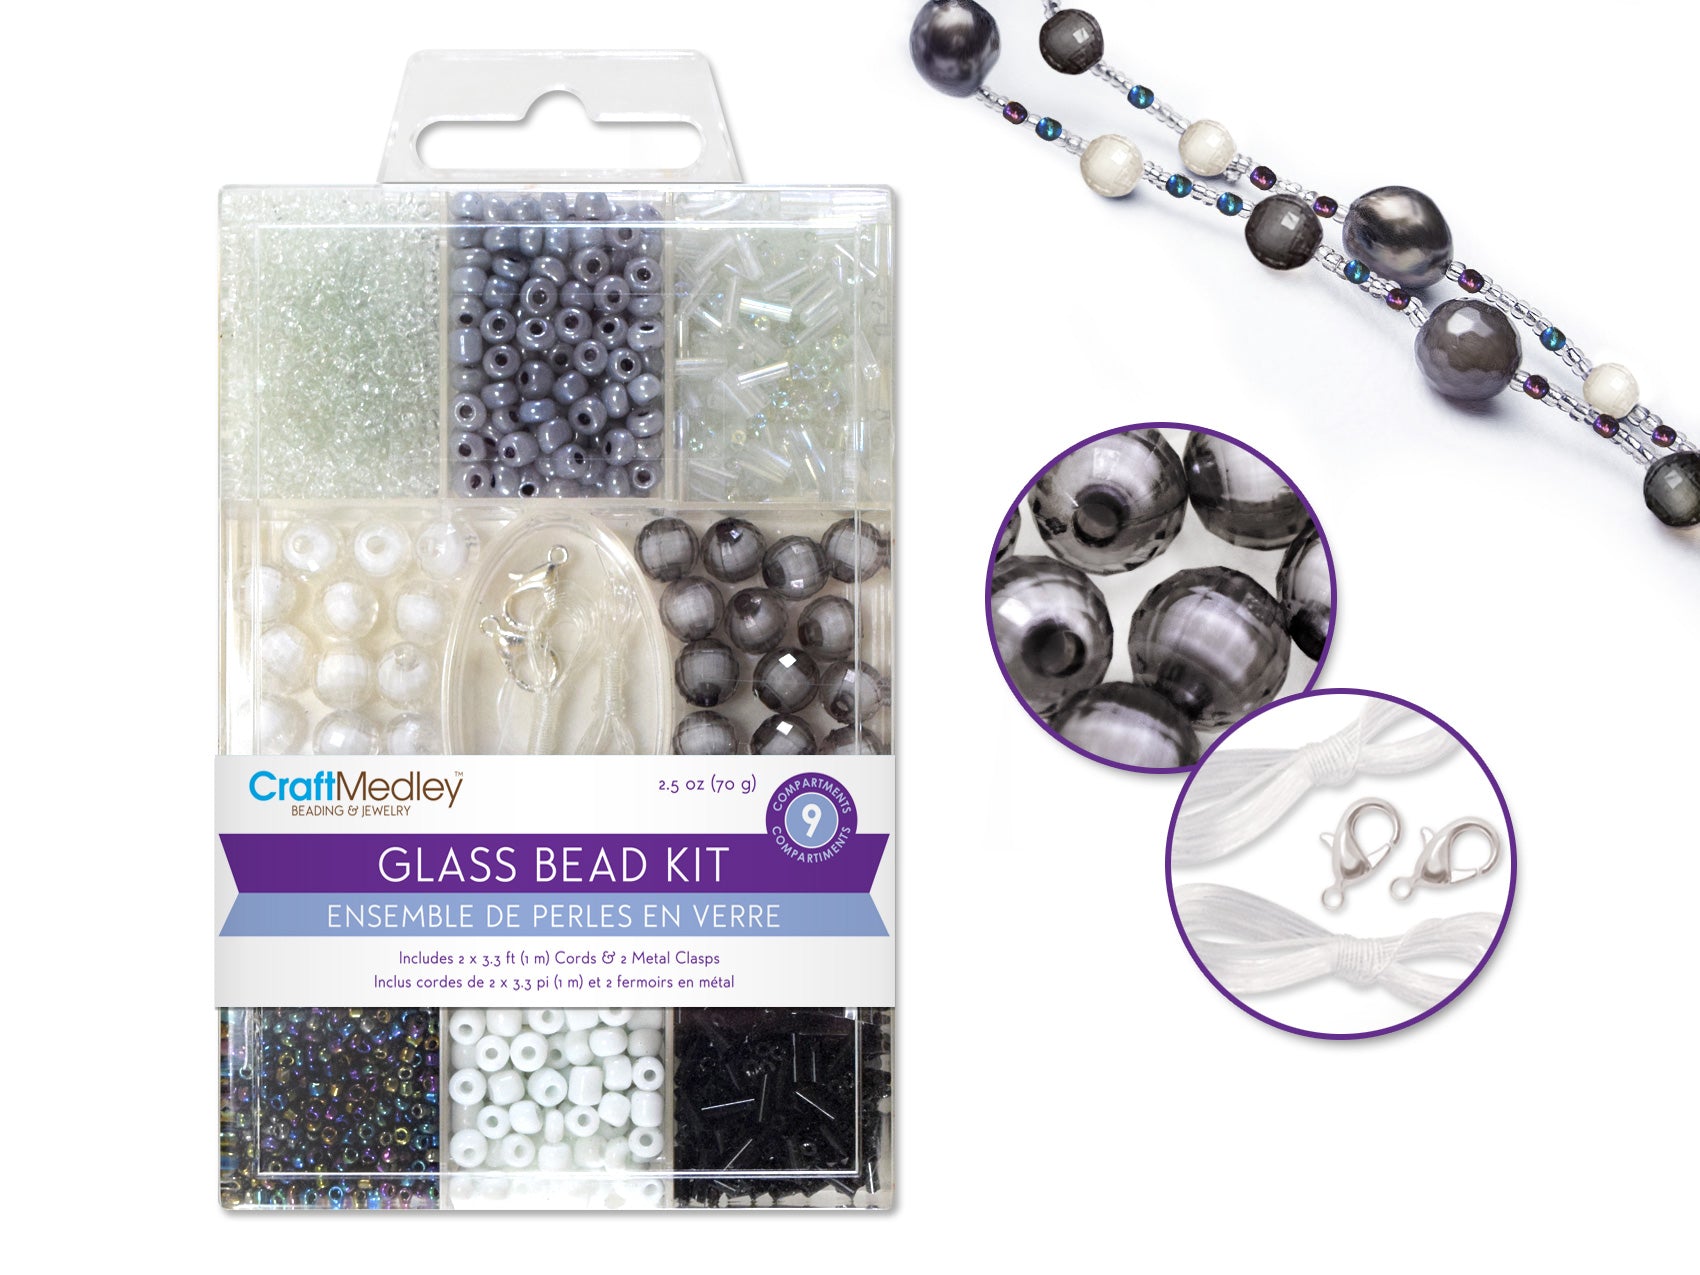 Craft Medley Cup Sequins Packs